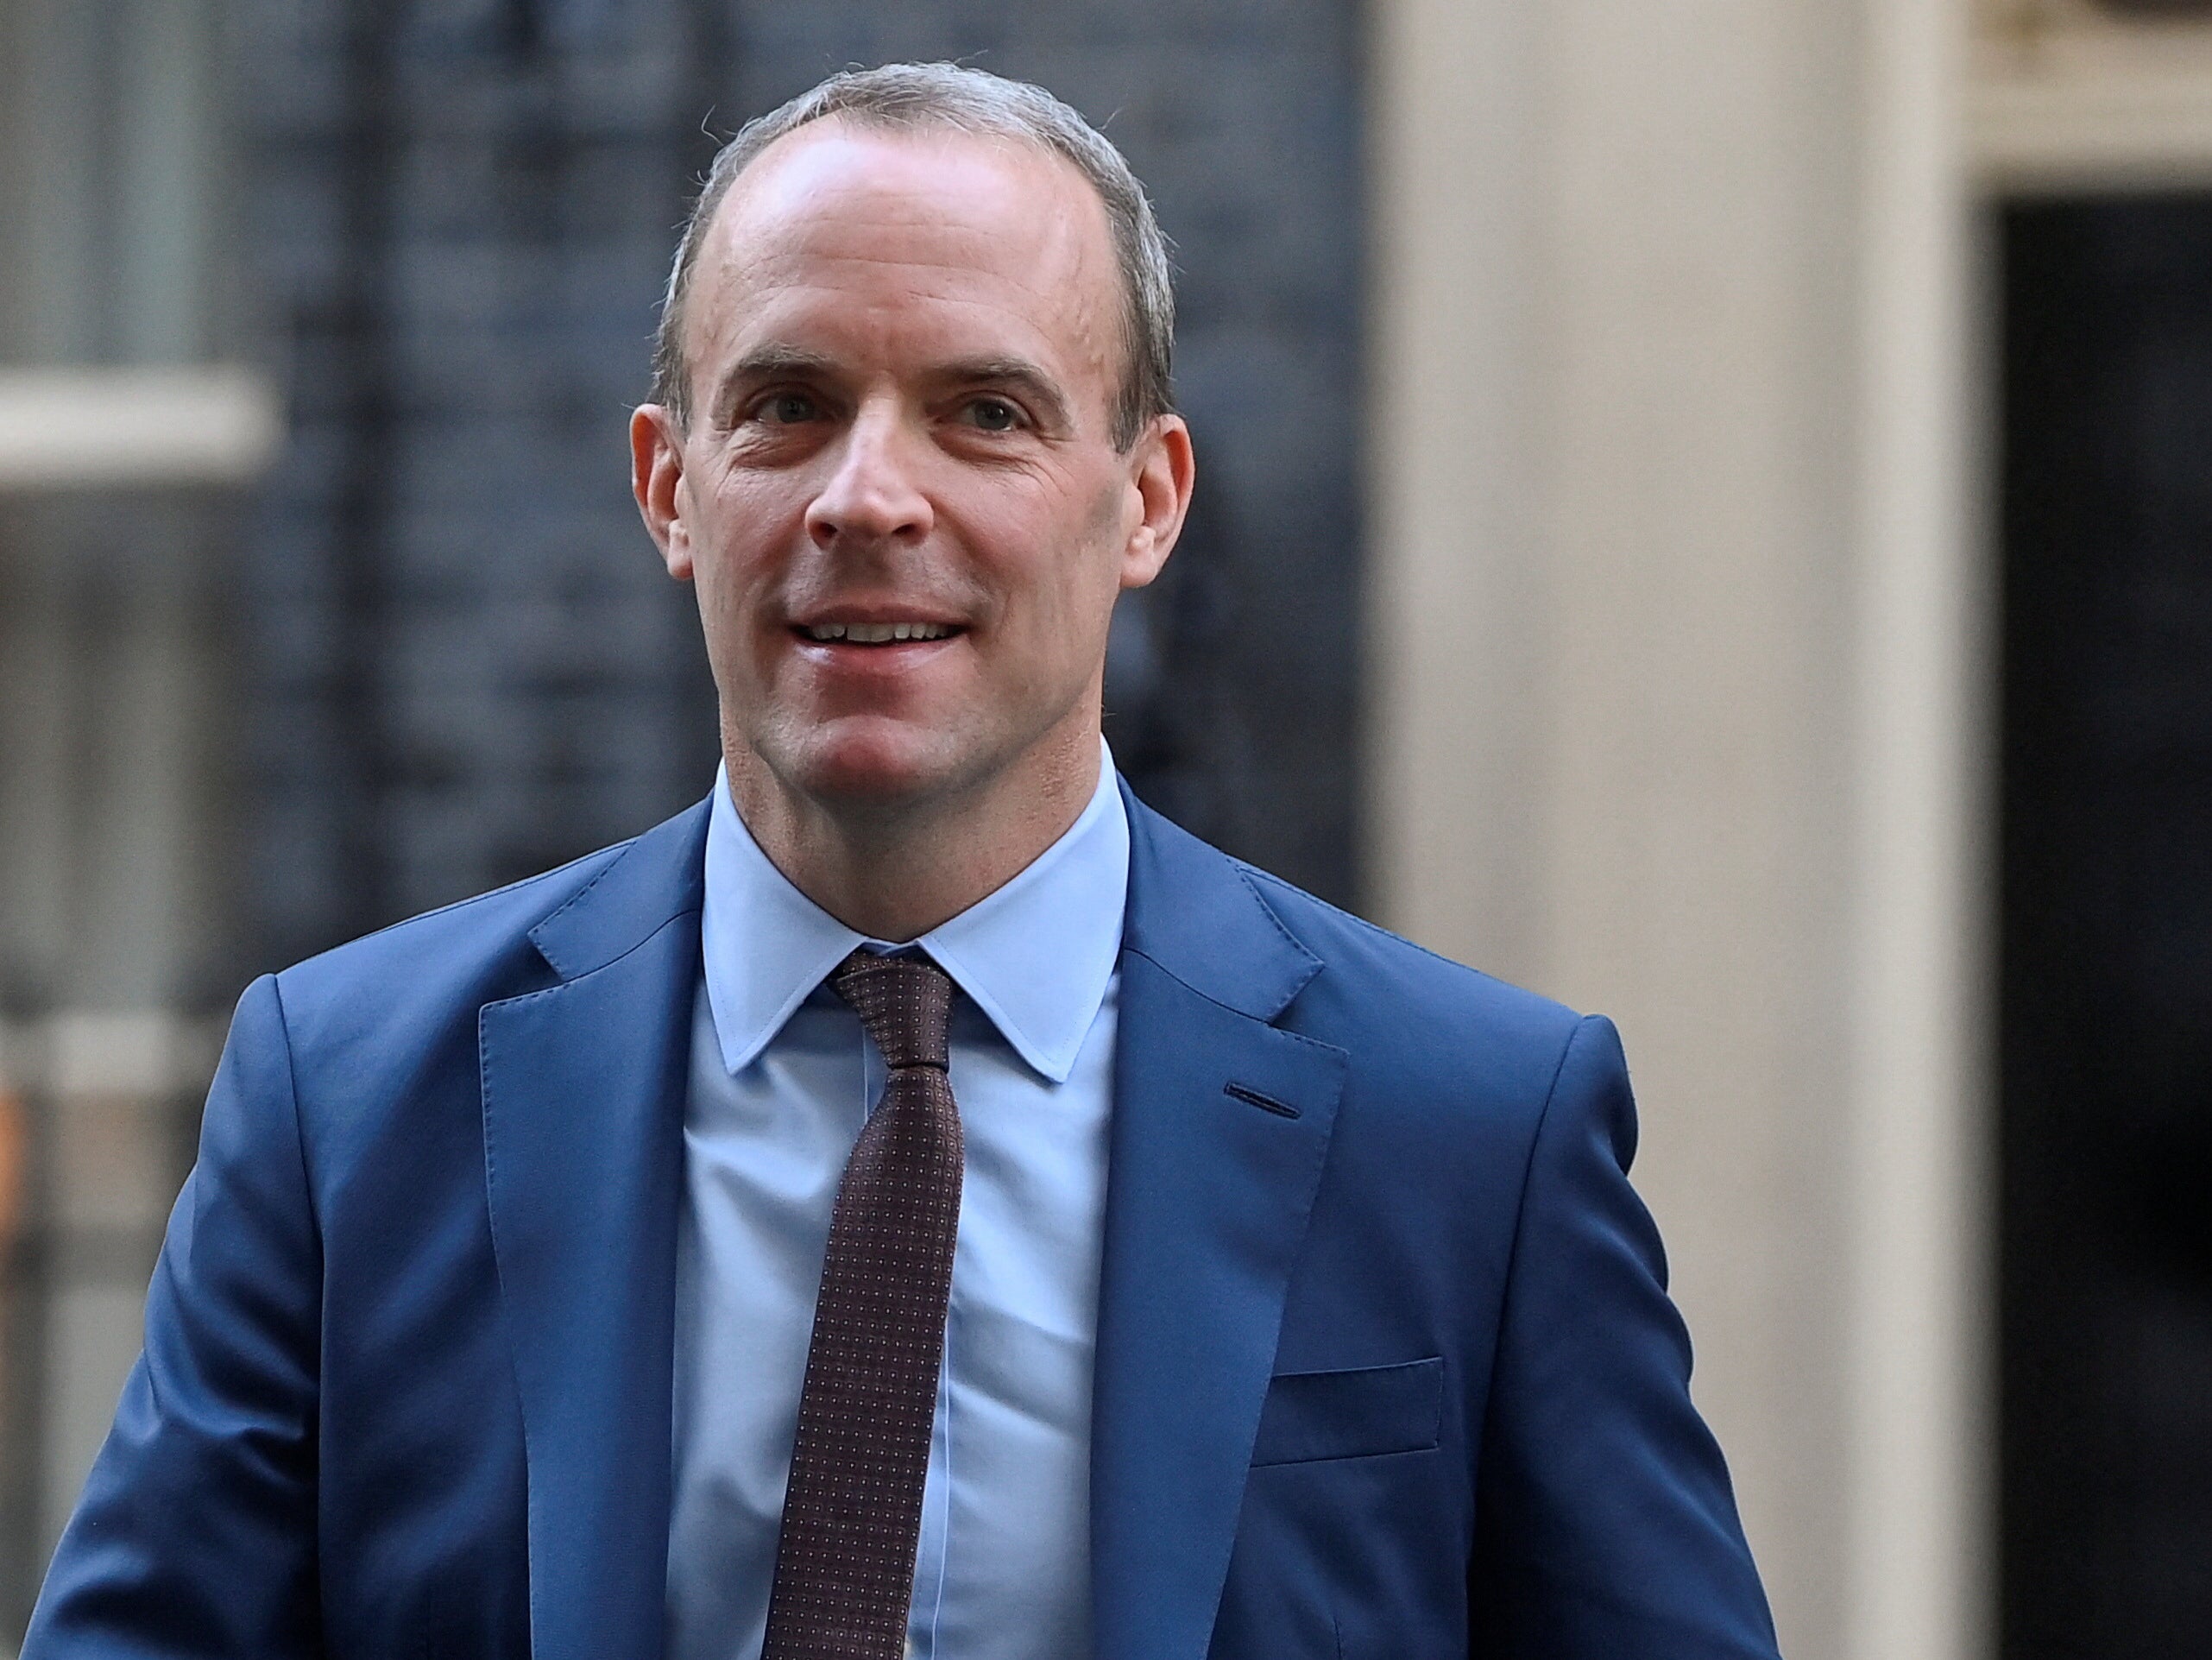 Dominic Raab is facing bullying allegations